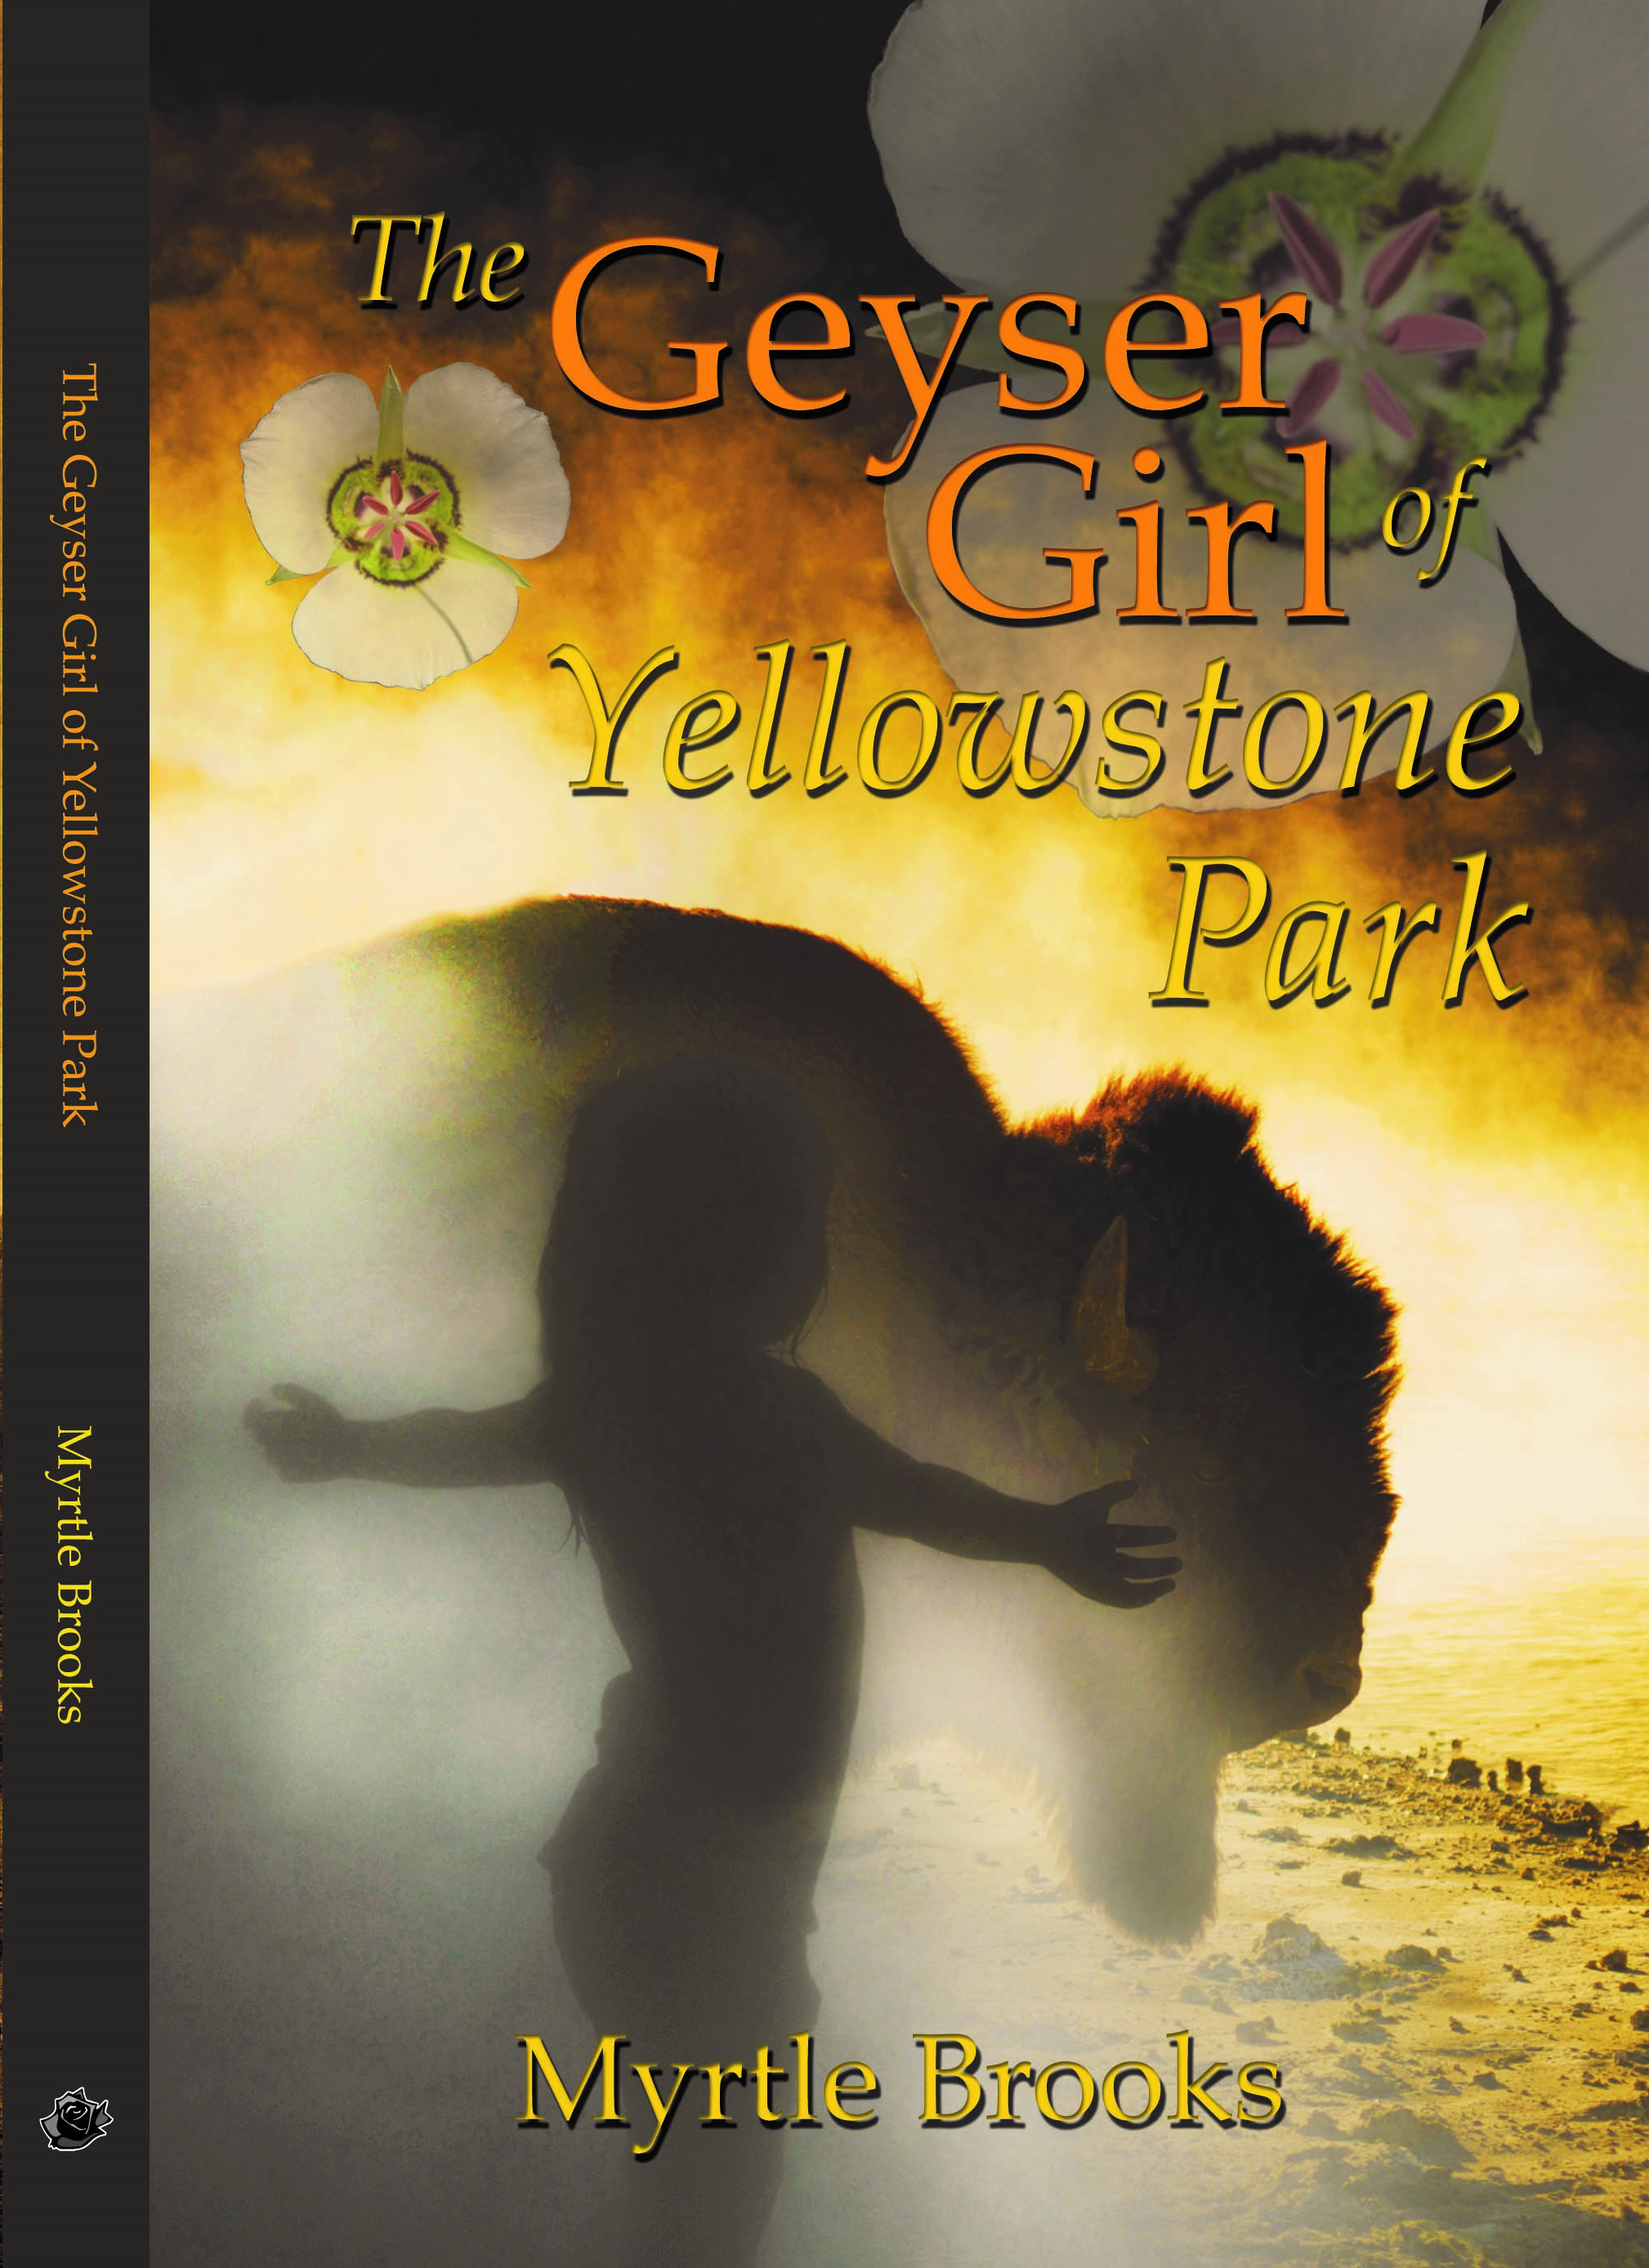 FREE: The Geyser Girl of Yellowstone Park by Myrtle Brooks